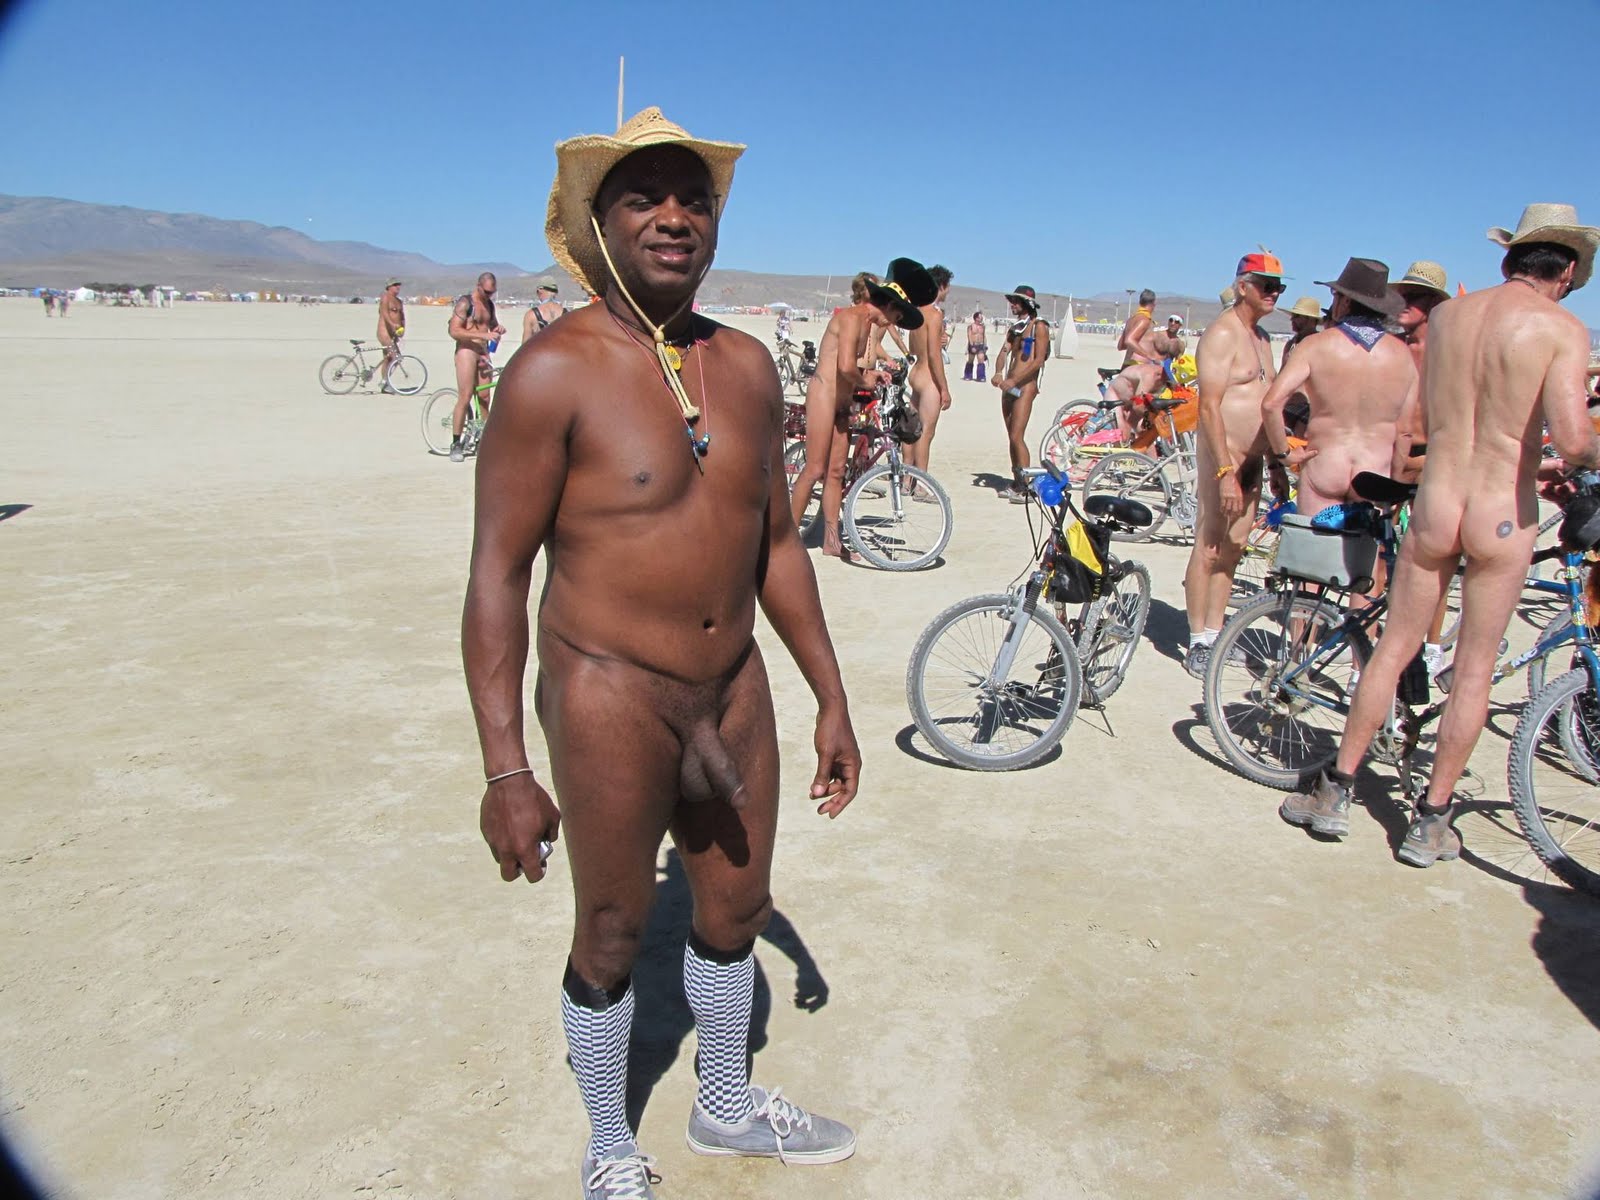 Nudes burning man 18 Pictures. 